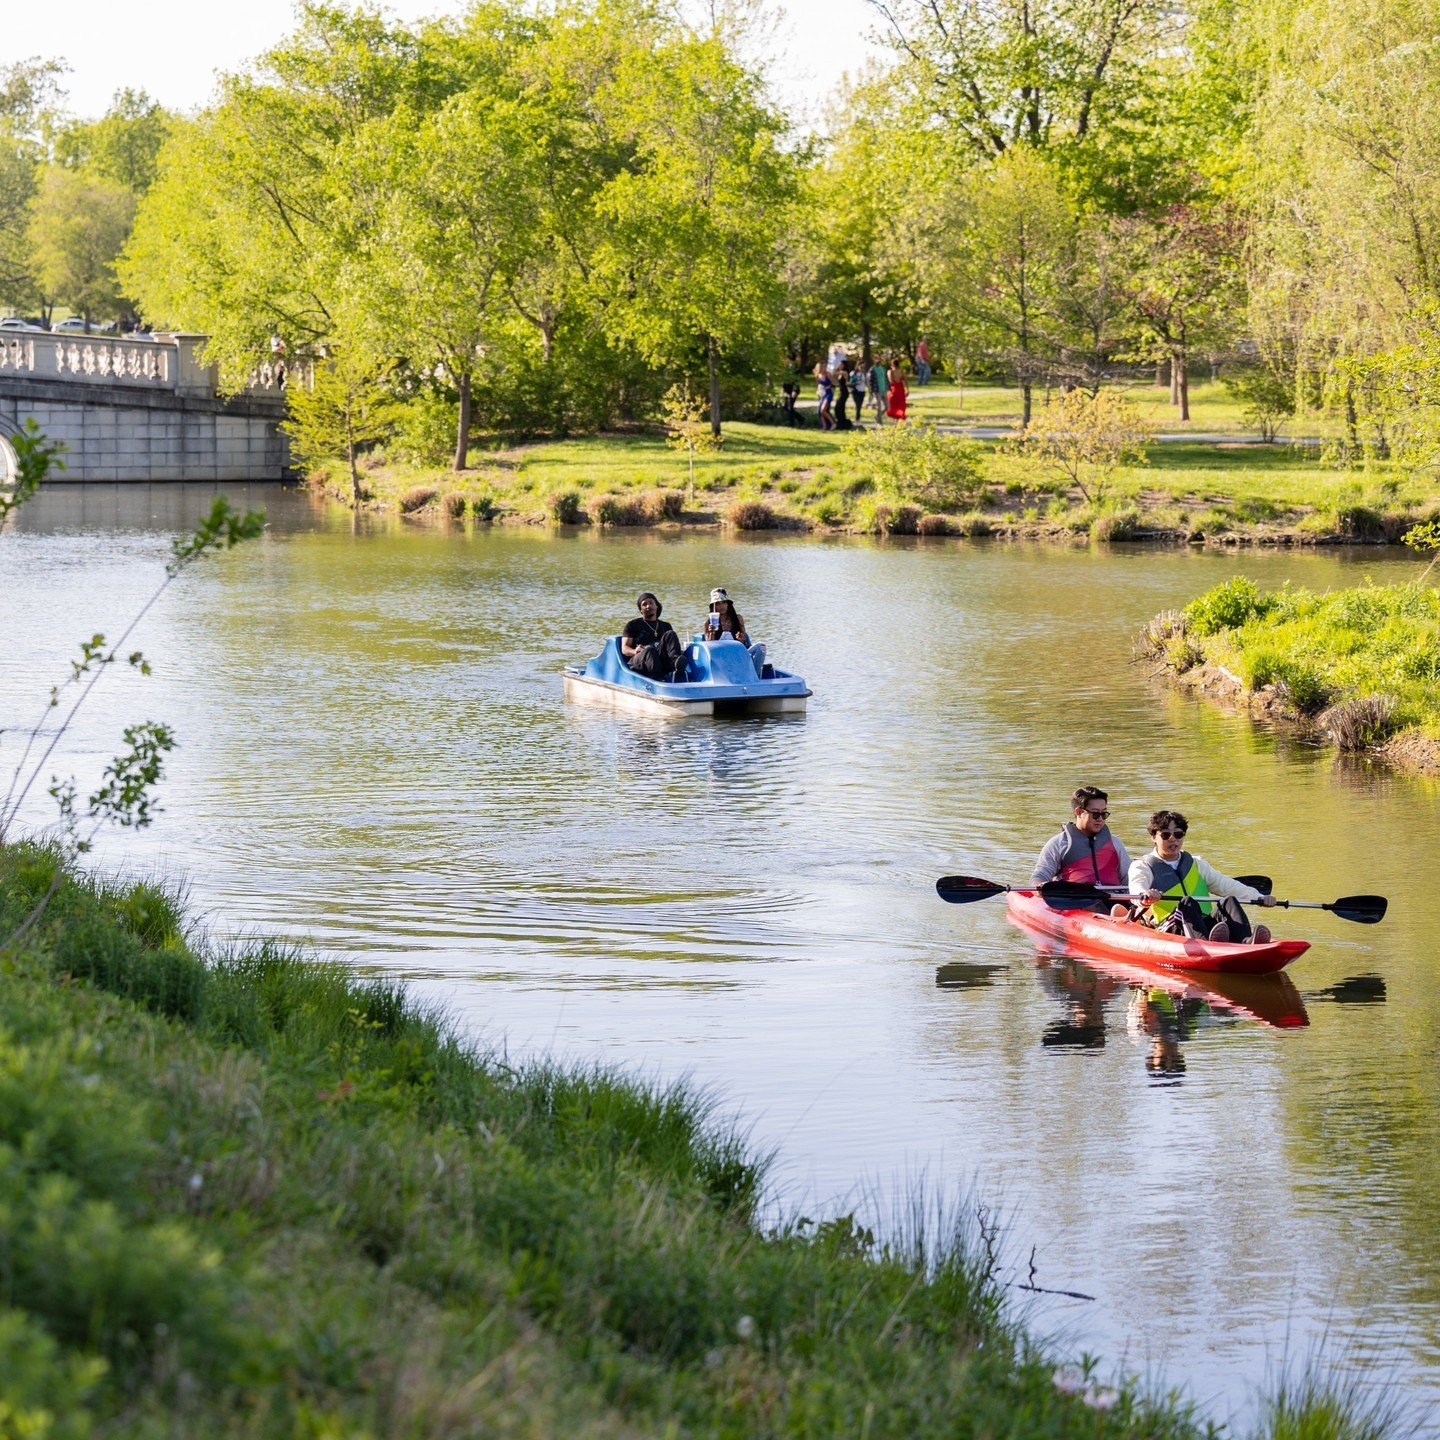 POV you visit @PaddleForestPark and it's decision time:
💙 team paddle boat
❤️ team kayak

{Image: Two people in a blue paddle boat and two in a red kayak are moving along a waterway that is lined with green grass. A stone bridge and a cluster of peo